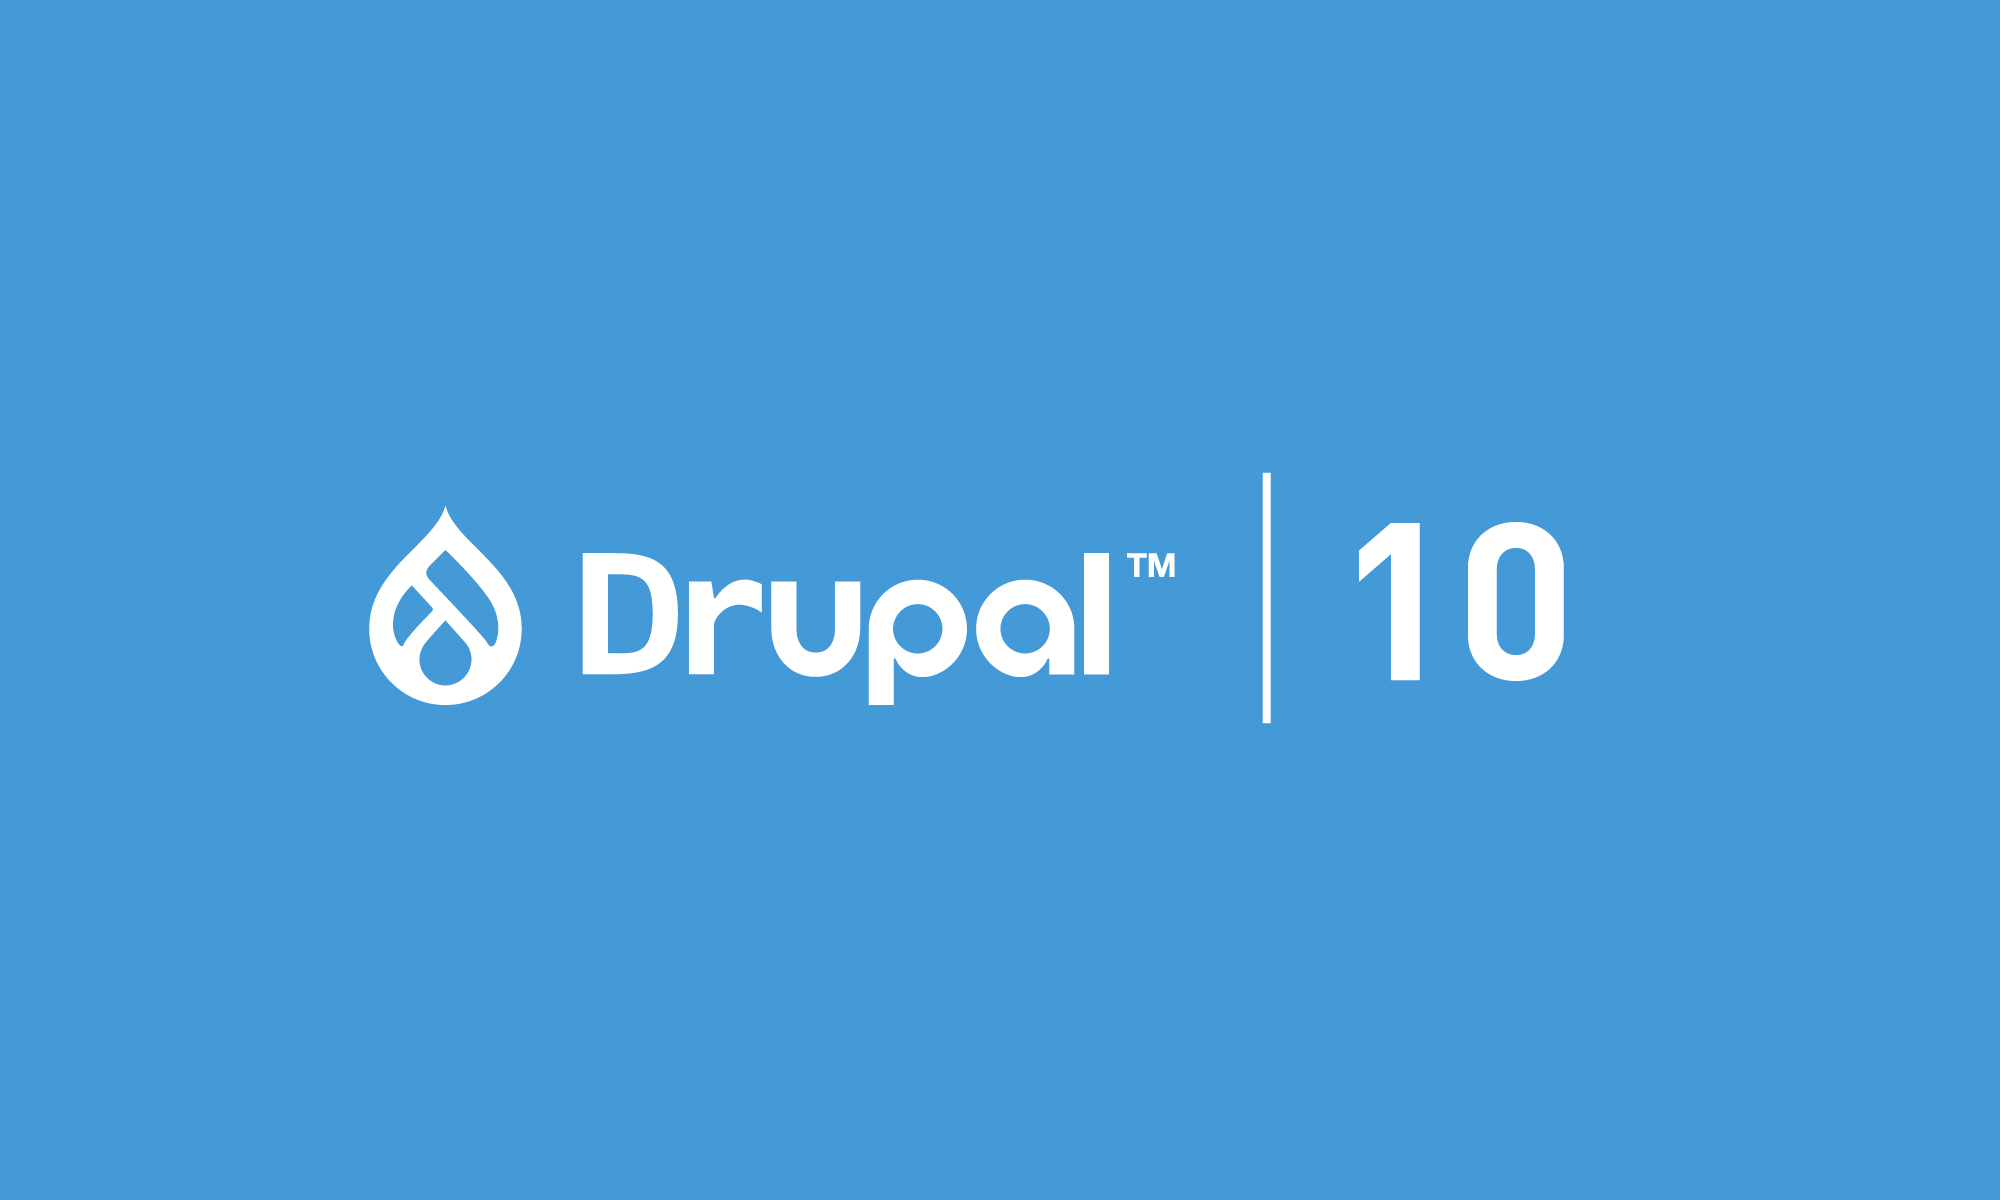 Upgrading to Drupal 10 is necessary